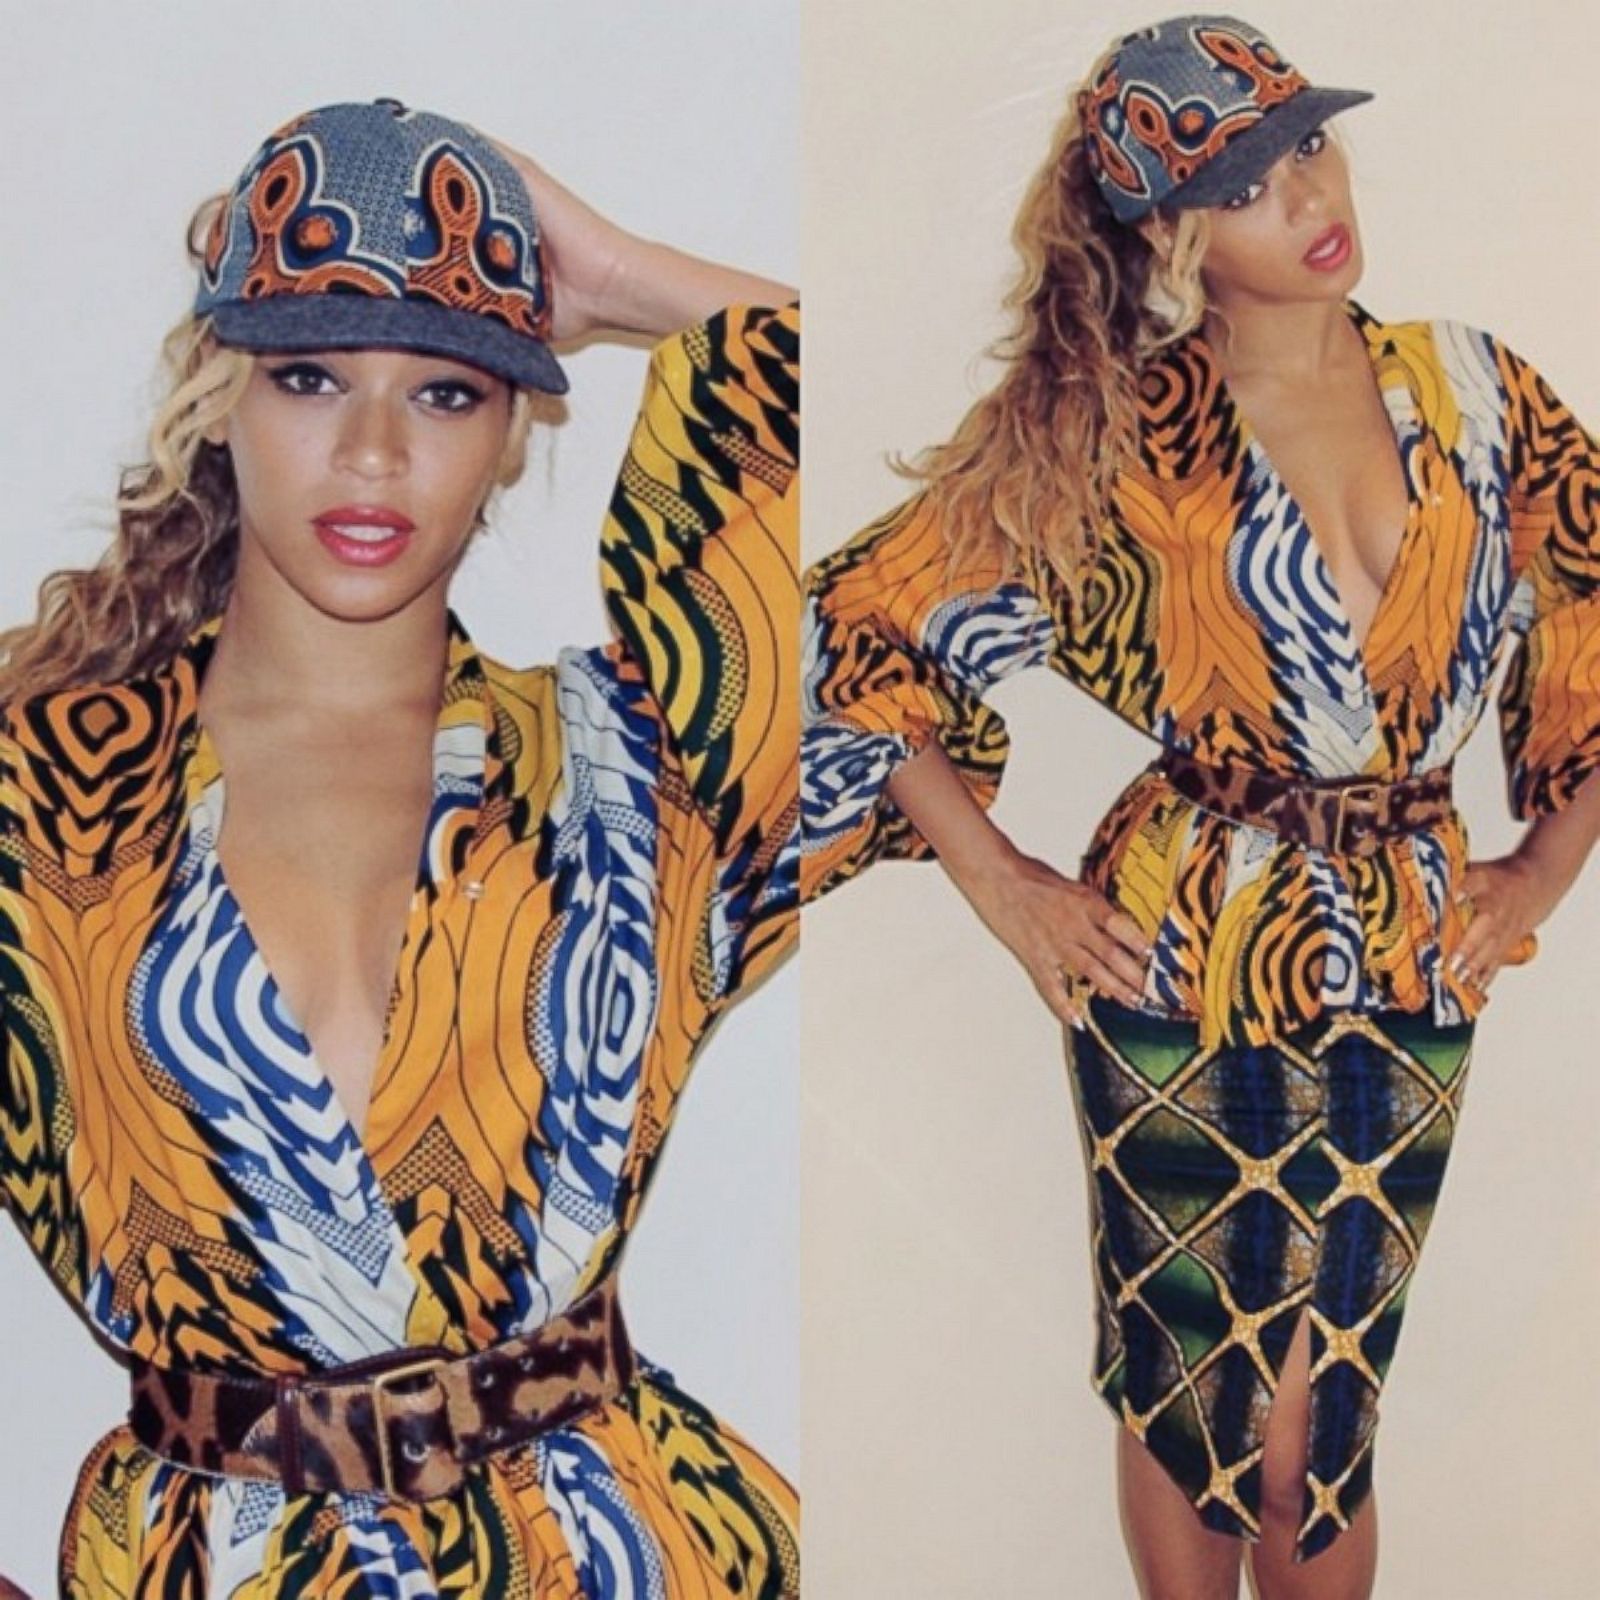 HT_beyonce_outfit_3_sk_140714_1x1_1600.jpg